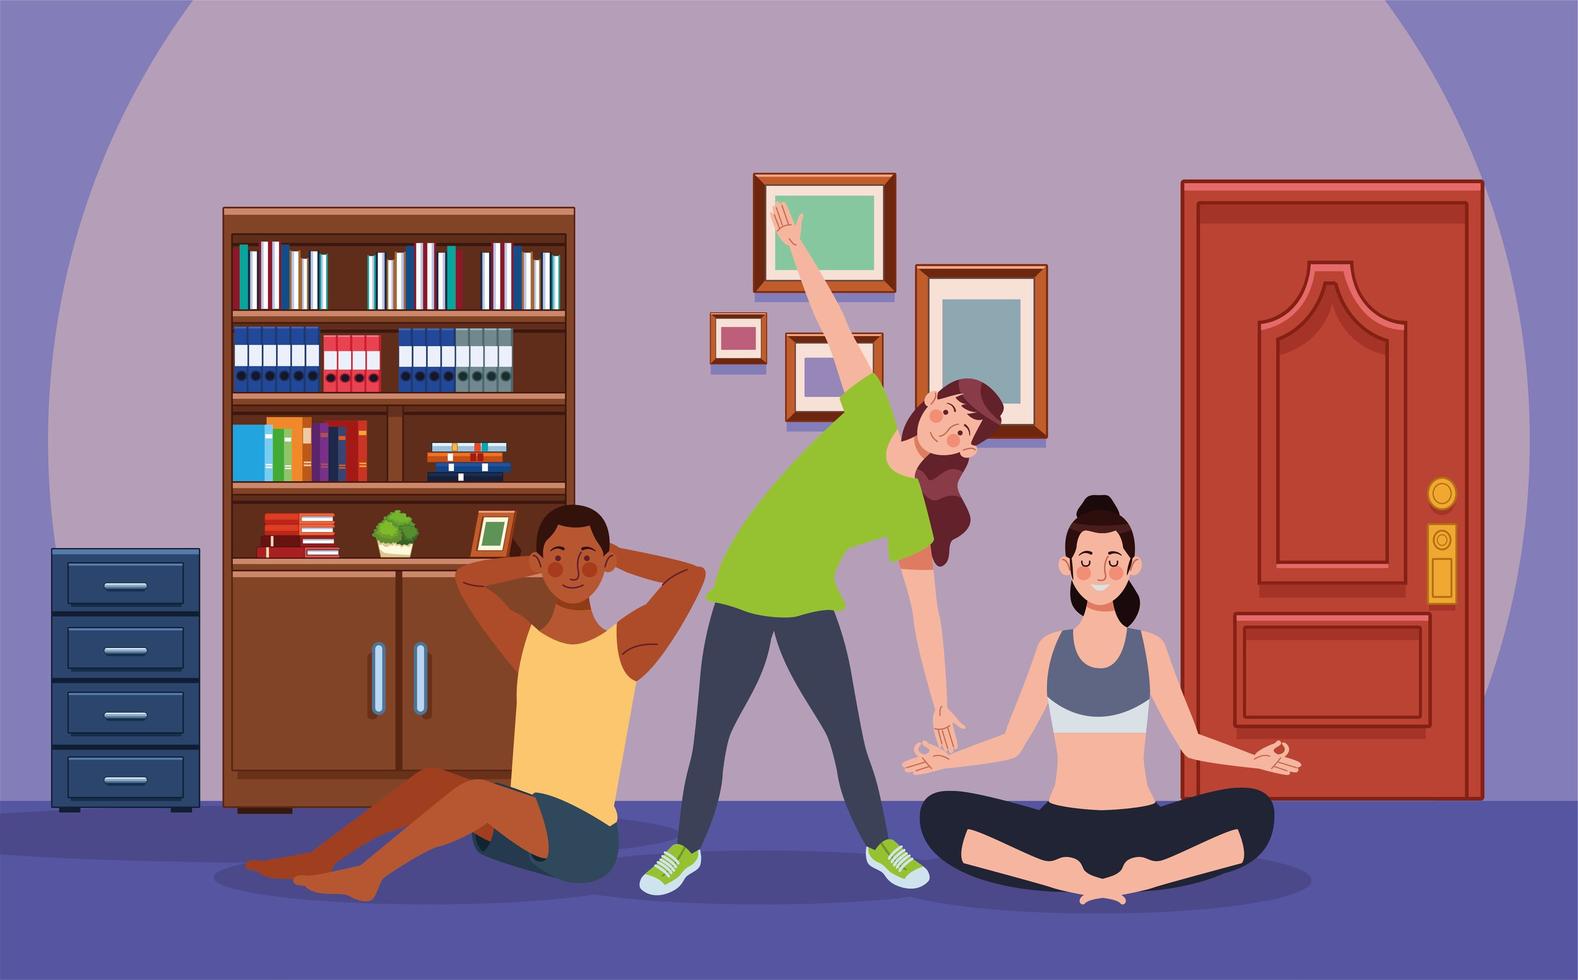 interracial people practicing exercise in the house vector